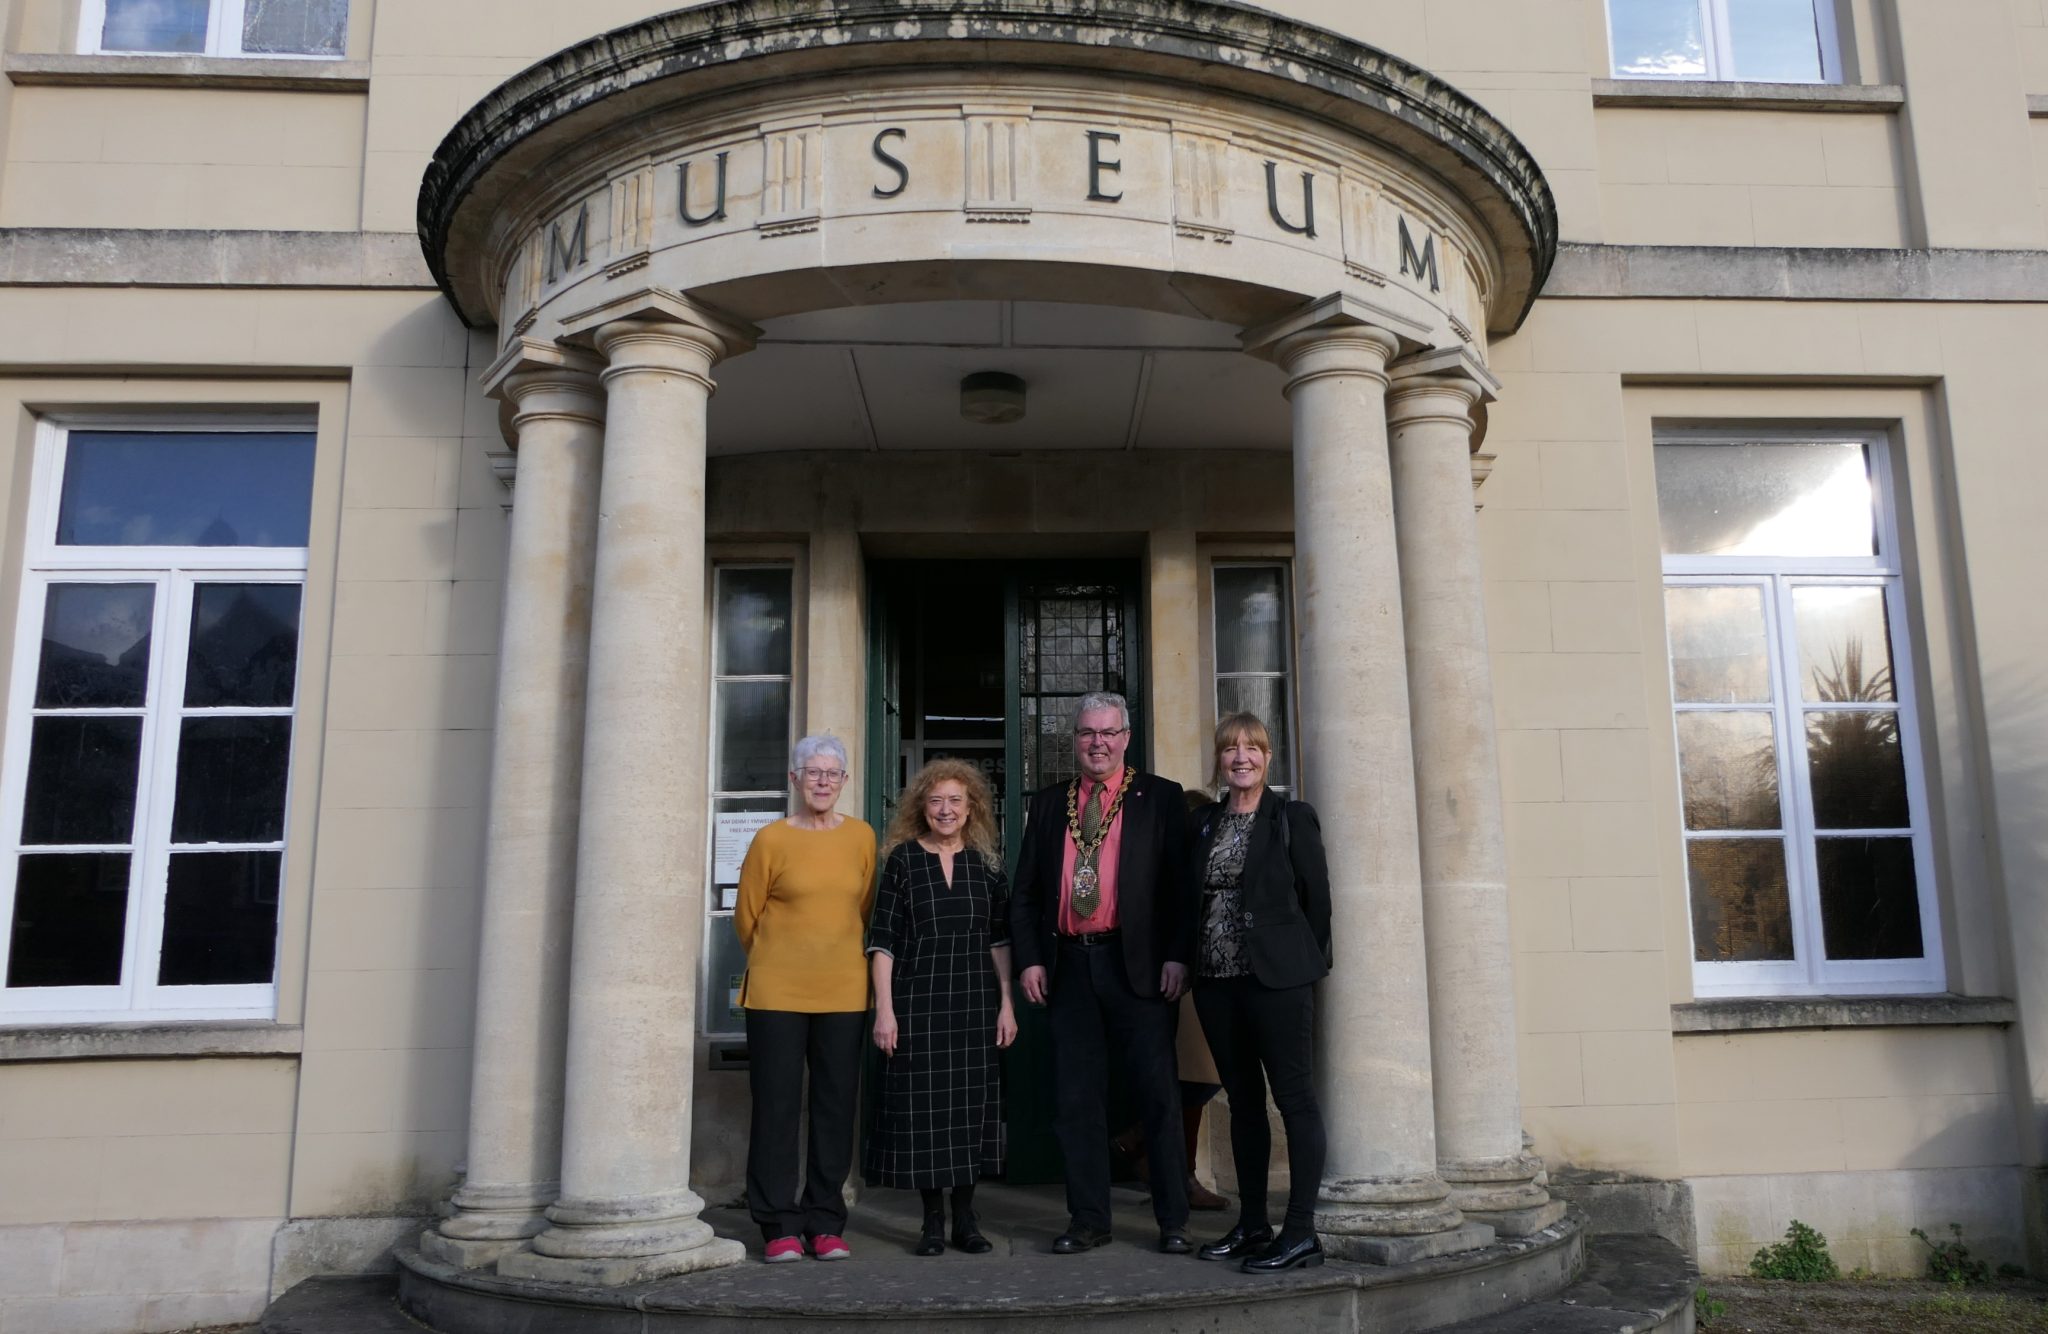 Chepstow Museum celebrates 75 years of community heritage - Monmouthshire 